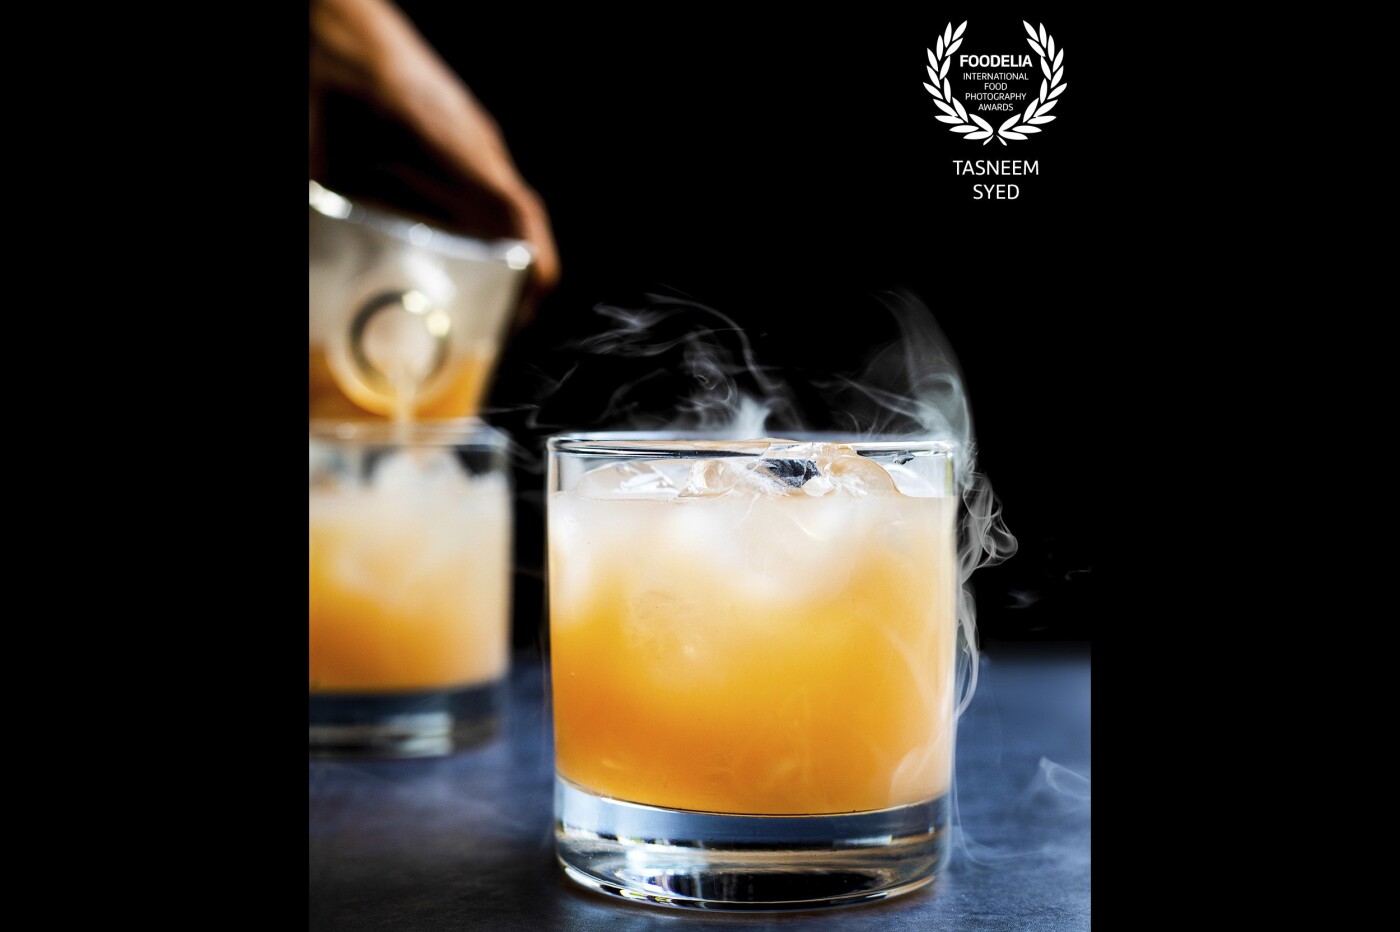 Photographed this gorgeous smoke-infused cocktail for a local client. I used natural defused light for this shot from a window on the right and I absolutely love the outcome. 